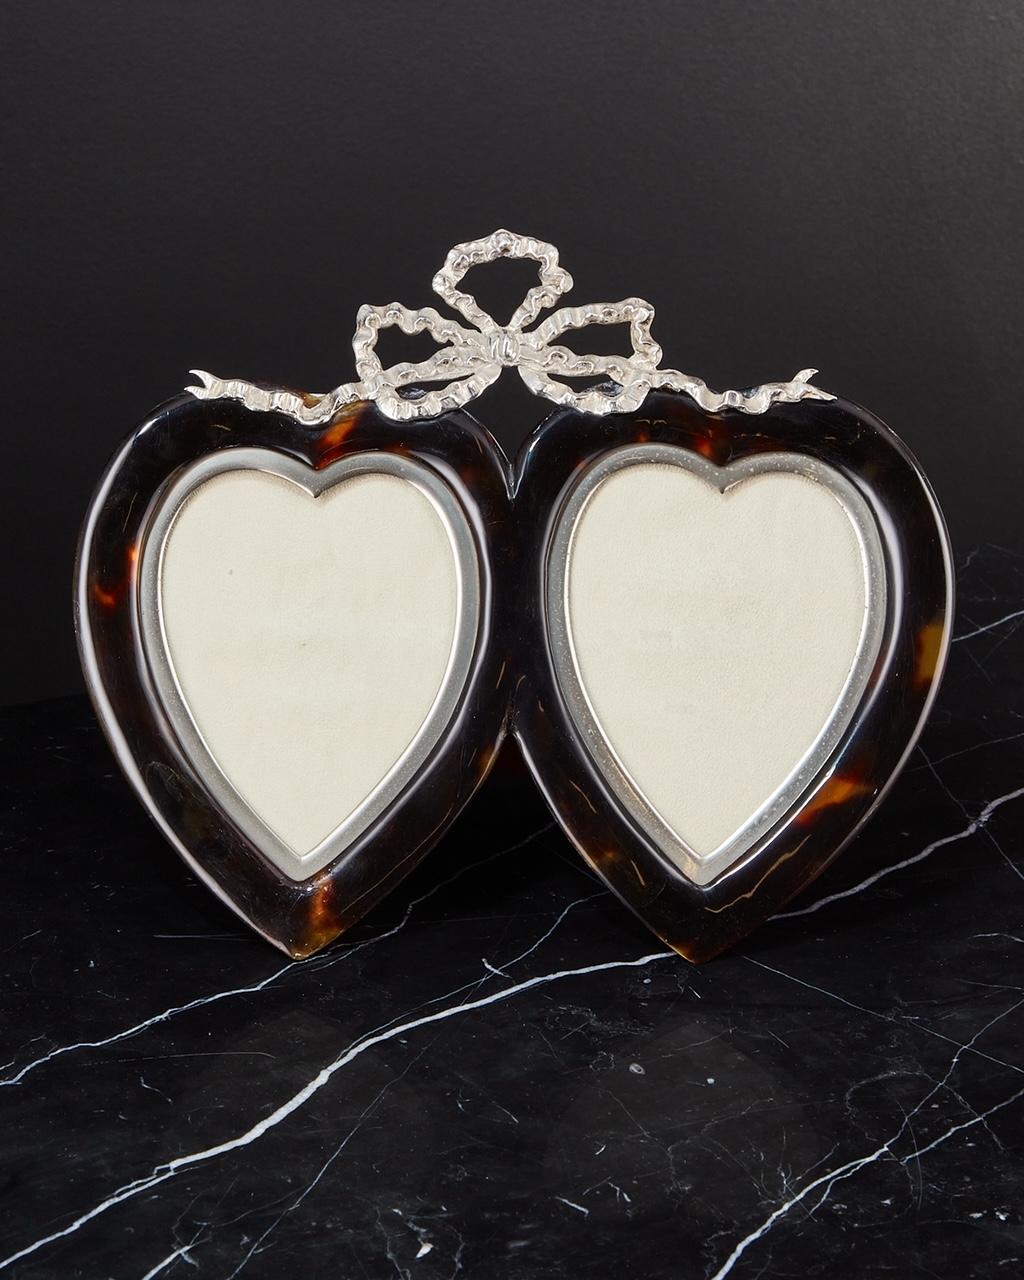 Tortoiseshell and silver heart photograph frame date London, 1897
Maker Henry John Batson & Albert Edward Batson 
This frame is in excellent condition the tortoiseshell retains its original patina, the cast silver surround and bow decoration set it